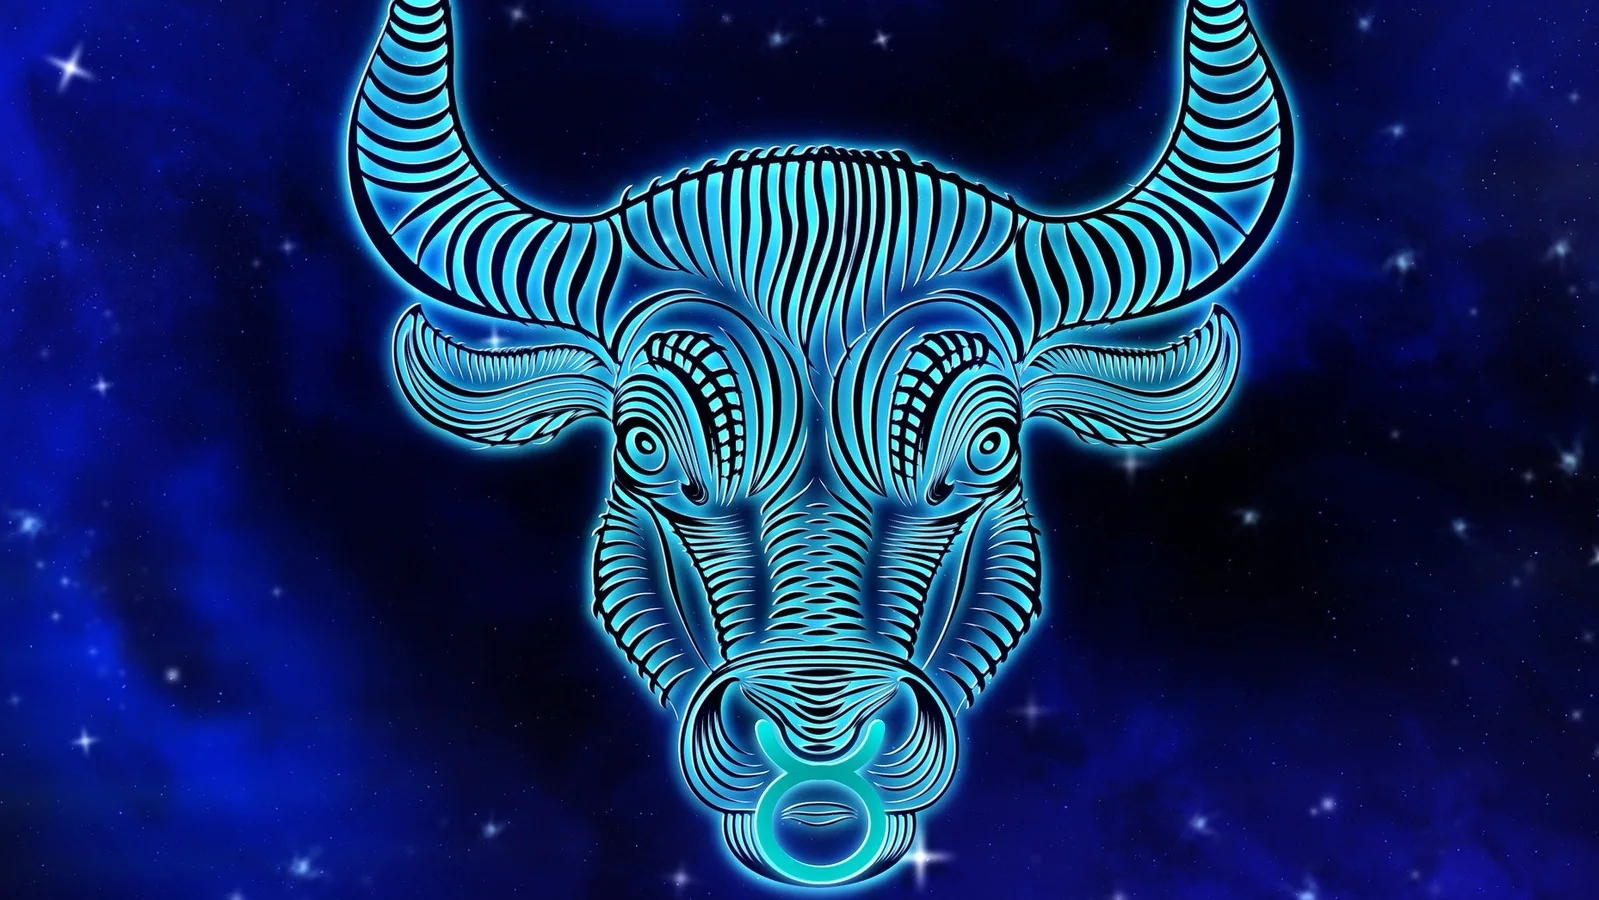 Astrology on your mind?  Is your password Taurus?  Don’t use a horoscope;  Check out these astro..